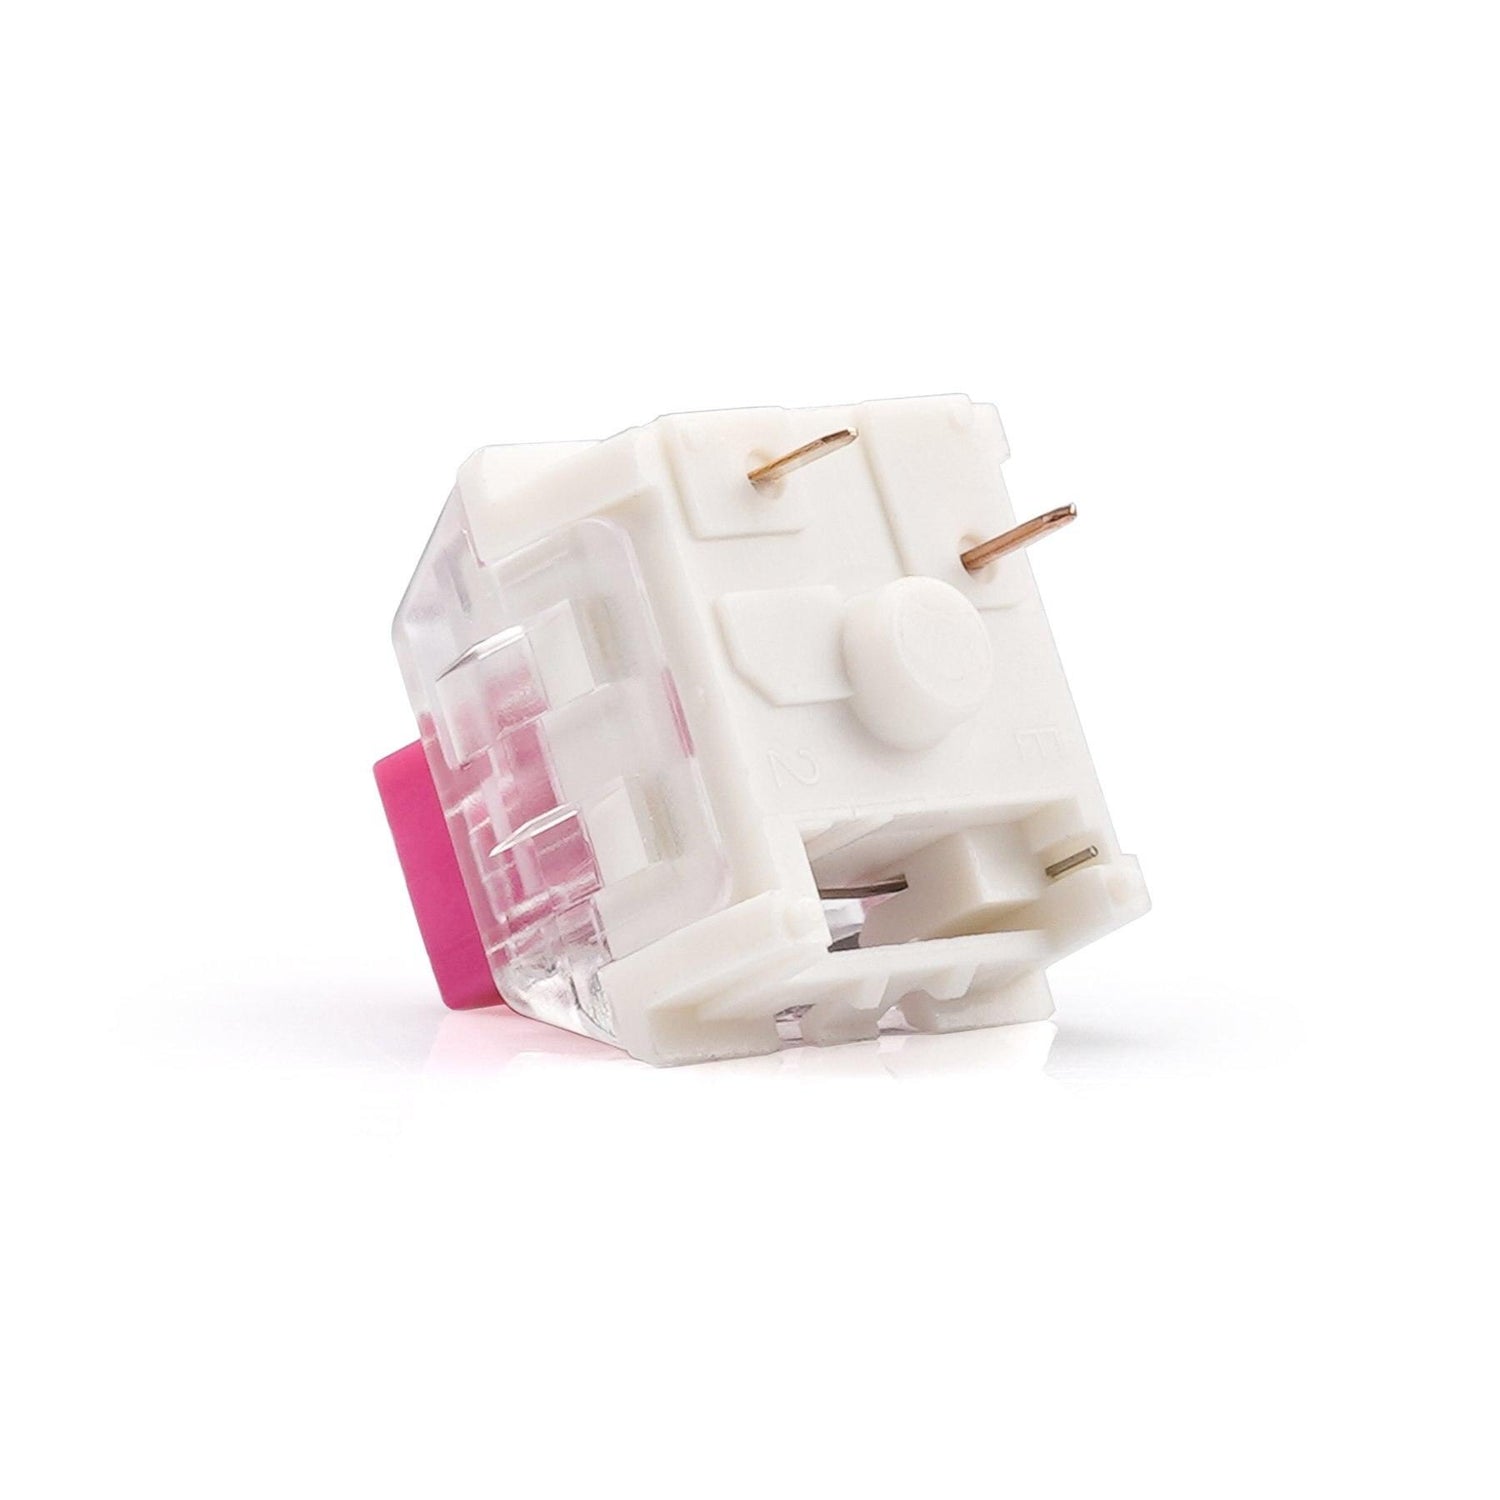 NOVELKEYS X KAILH BOX PINK CLICKY SWITCHES - THE KEYCAP CLUB